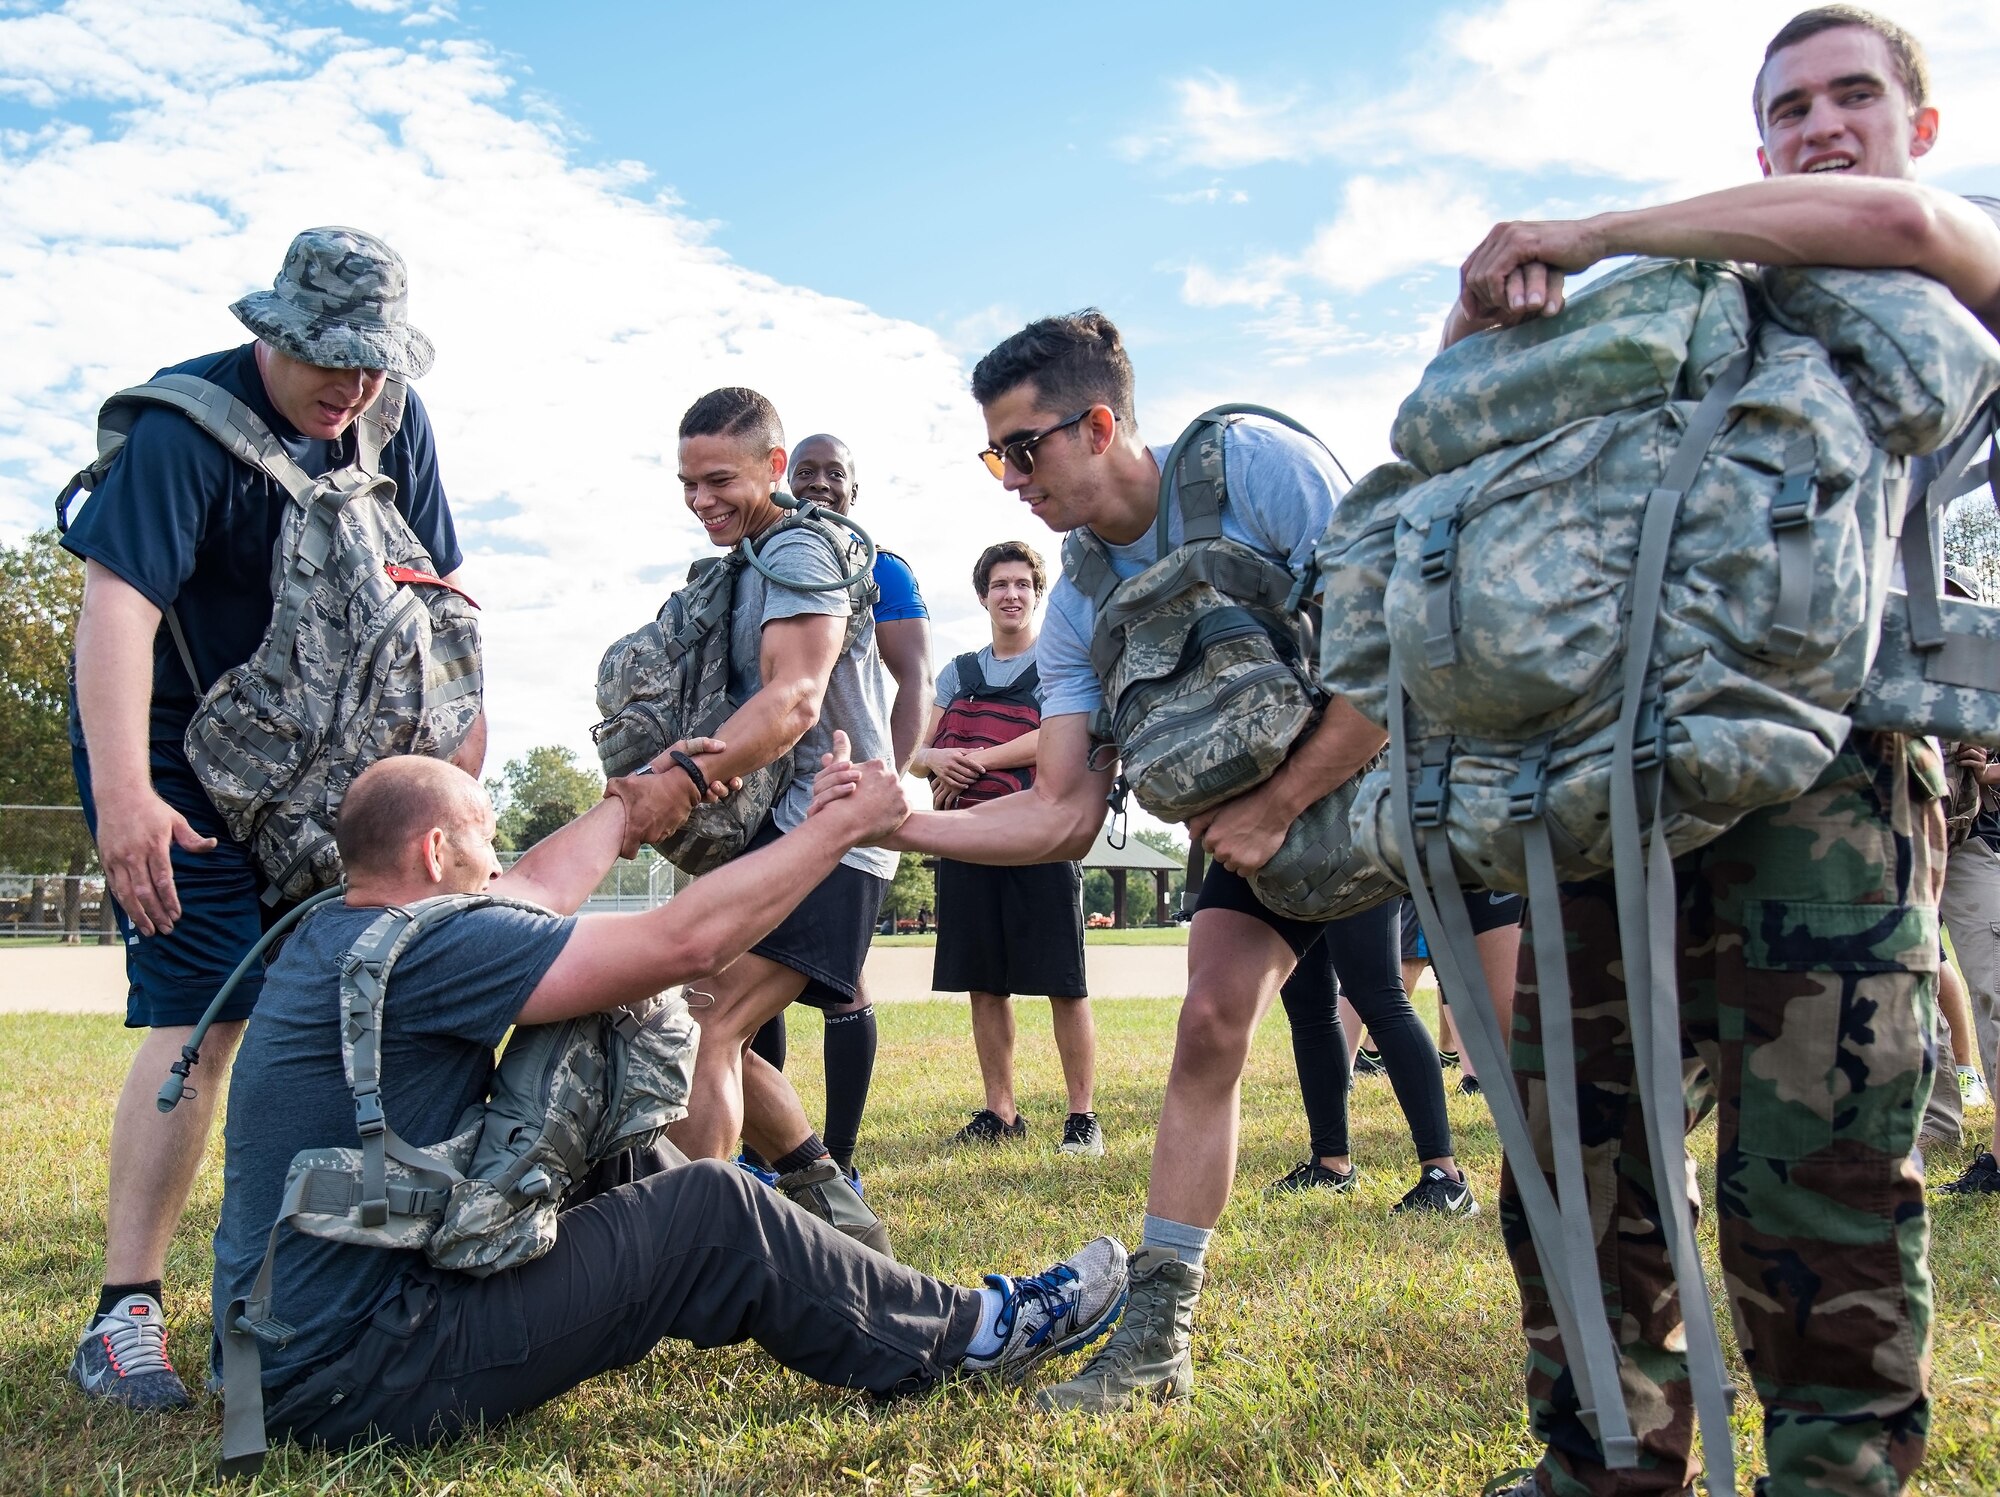 GORUCK participants help a member up after completing a warm-up exercise Oct. 6, 2017, at Brecknock Park in Camden, Del. Thirty-one individuals participated in the 2017 GORUCK Light Challenge that teaches participants how to overcome adversity by working as a team. (U.S. Air Force photo by Roland Balik)